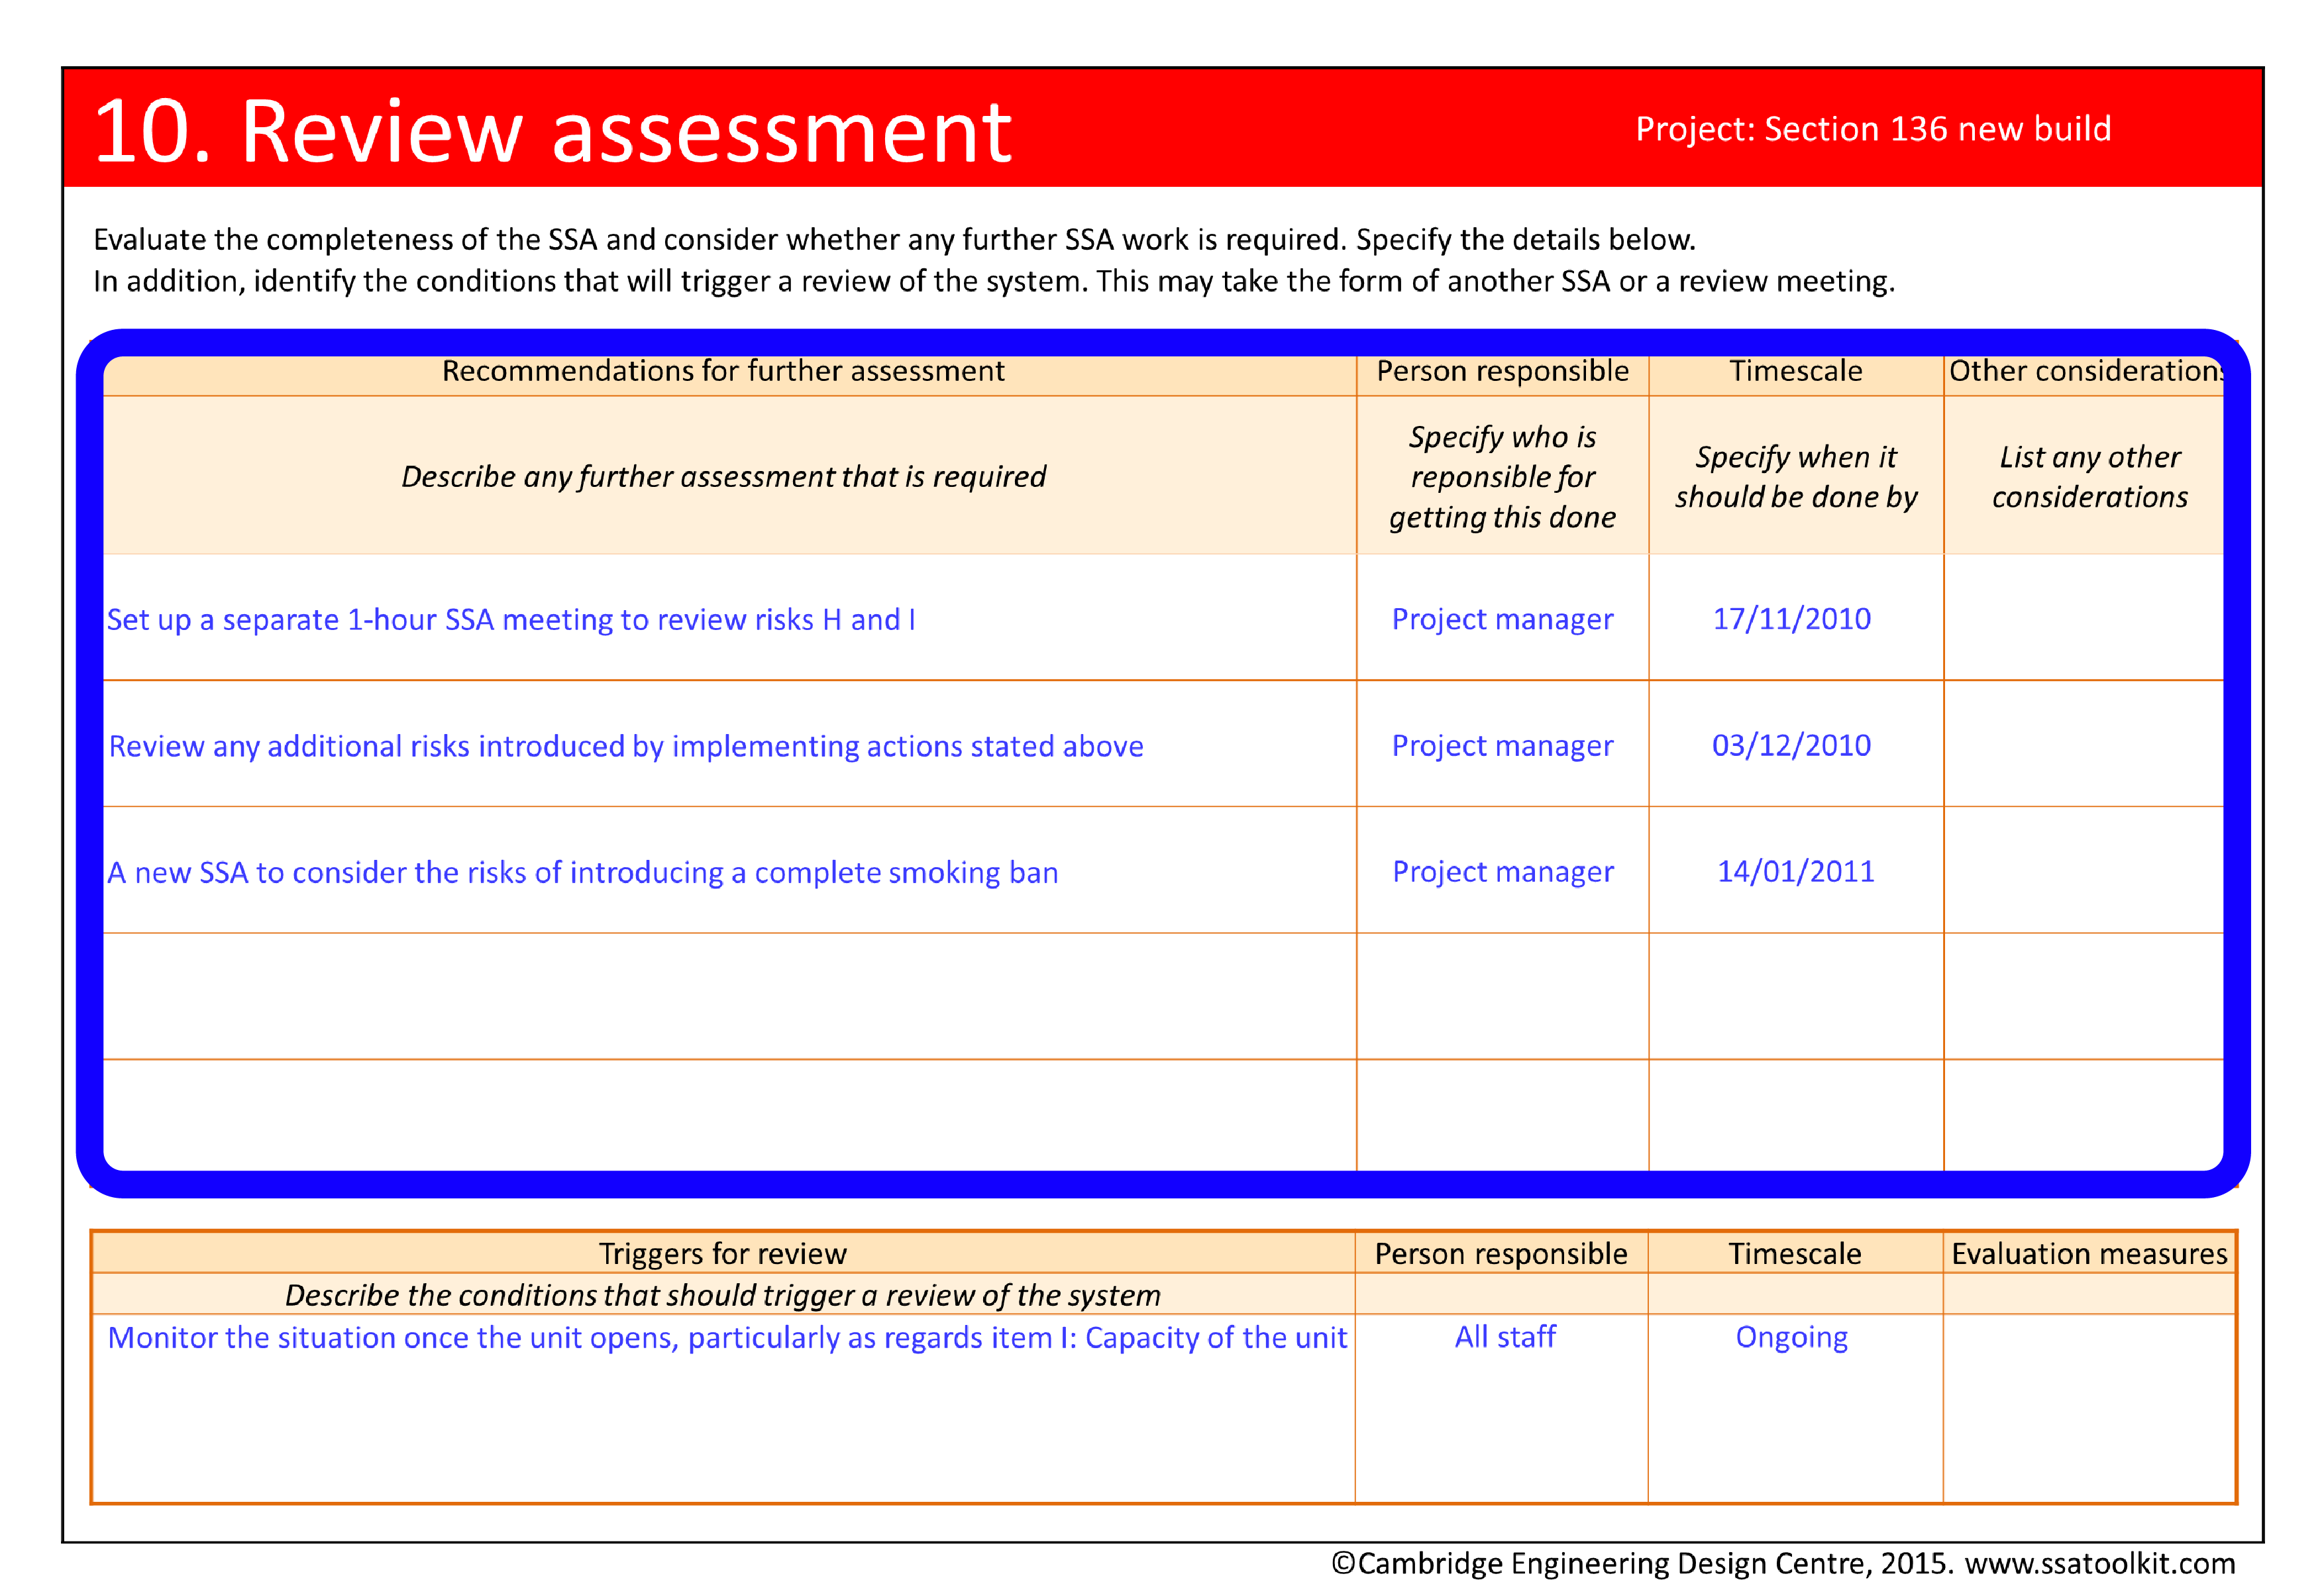 Screenshot of the Review assessment page from the Section 136 case study. The section on recommendations for further assessment is circled. The recommendations are to set up a separate 1 hour meeting to review risks H and I, to review any additional risks introduced by implementing the actions, and to conduct a new SSA to consider the risks of introducing a complete smoking ban. The full form in pdf is available from the Resources page.